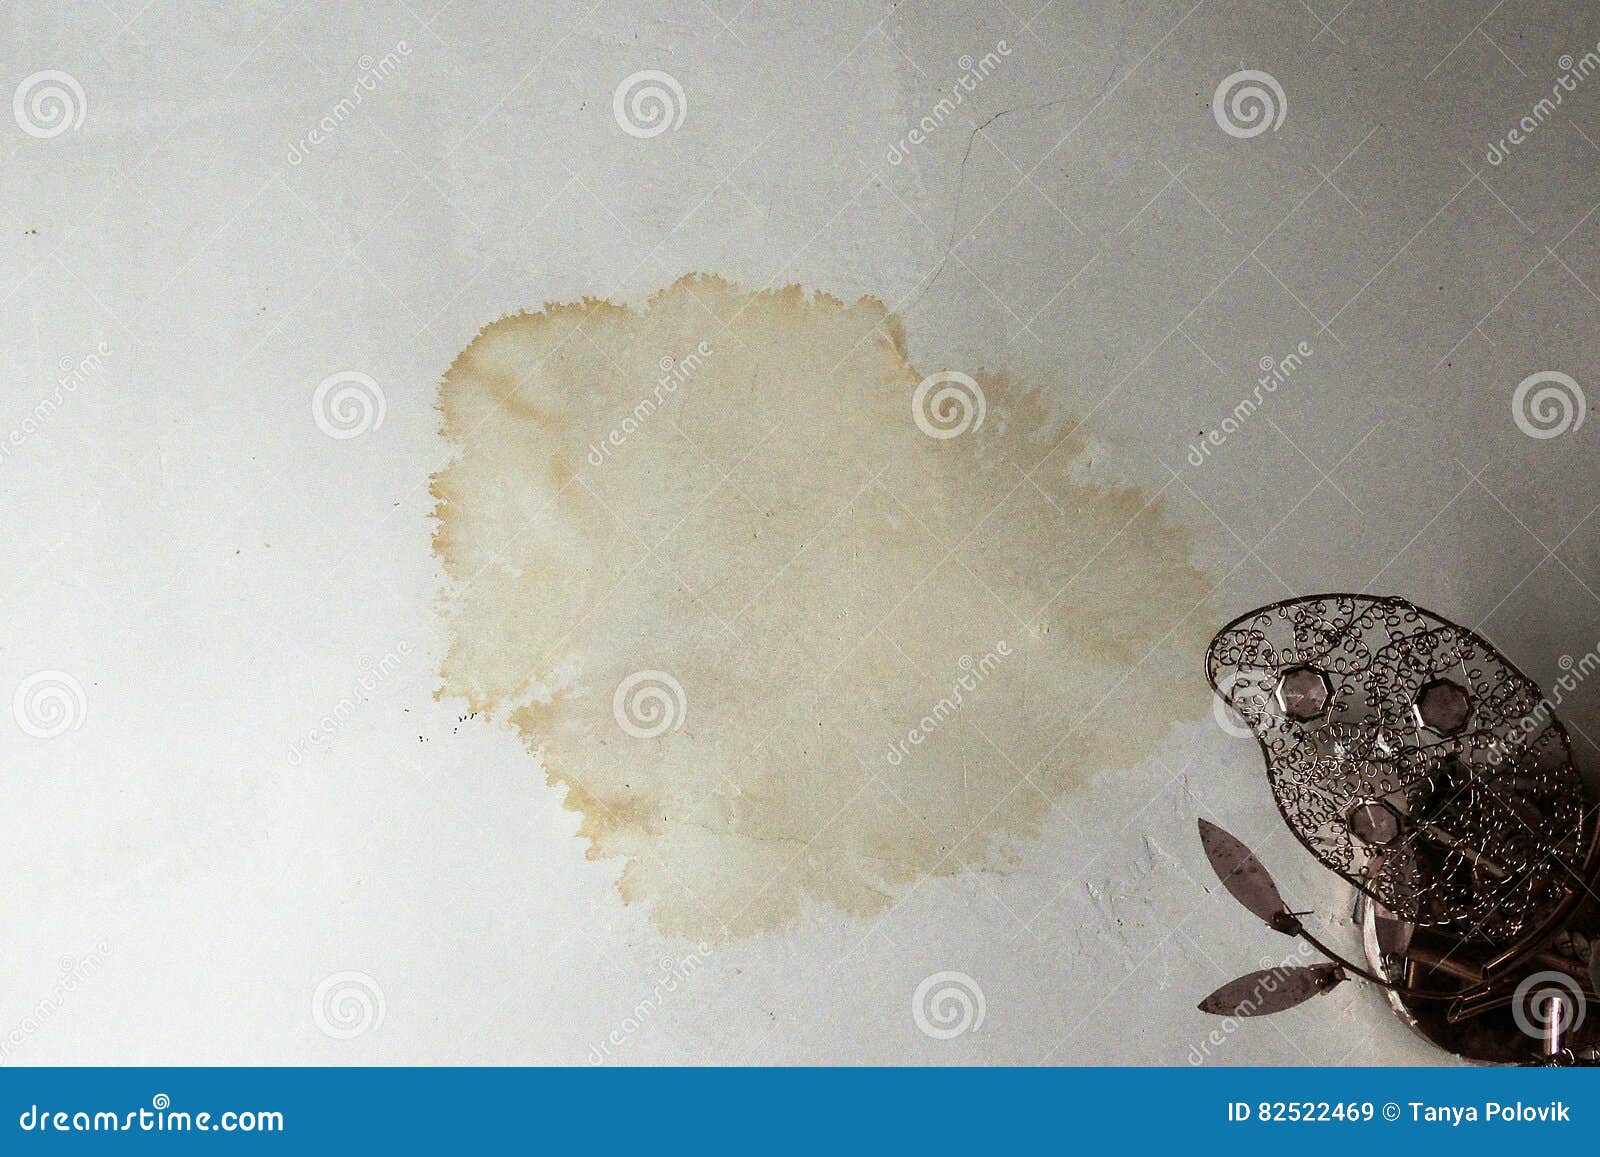 Stain On Ceiling From Rain Stock Image Image Of